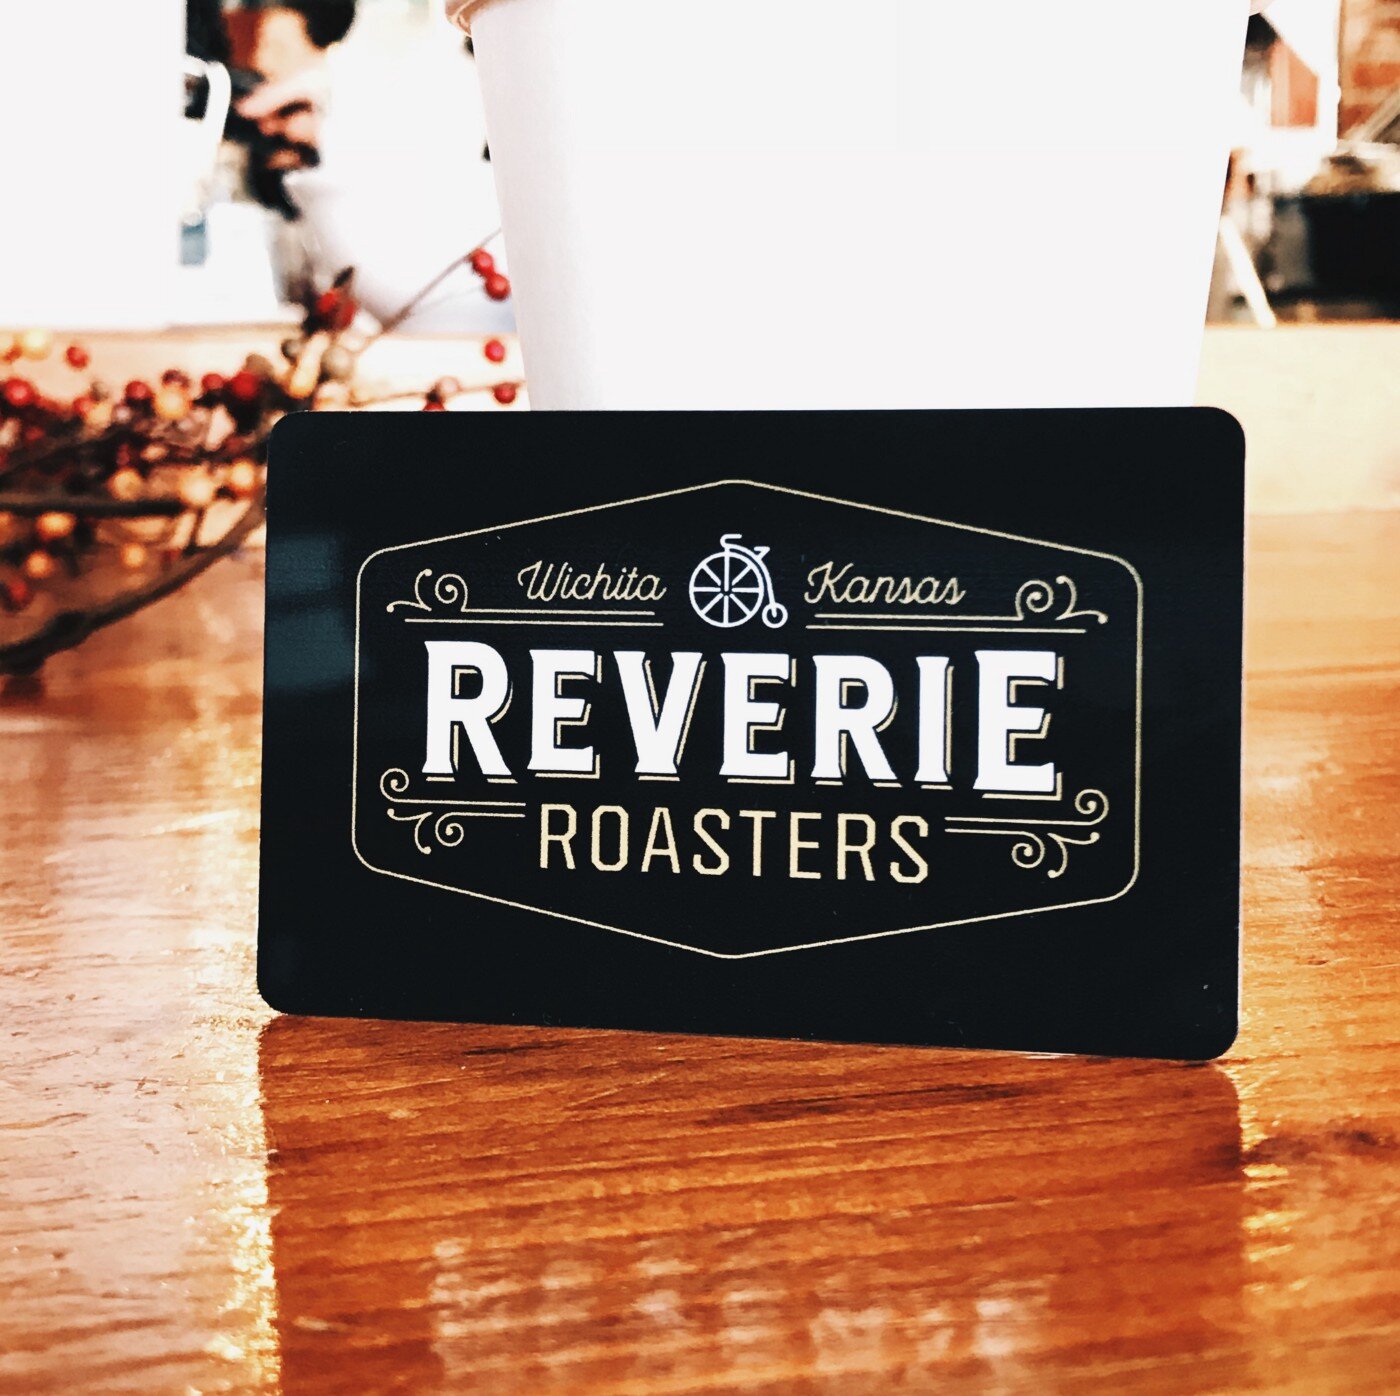 Coffee at Home: SimplyGoodCoffee Brewer is worth looking at — Reverie Coffee  Roasters